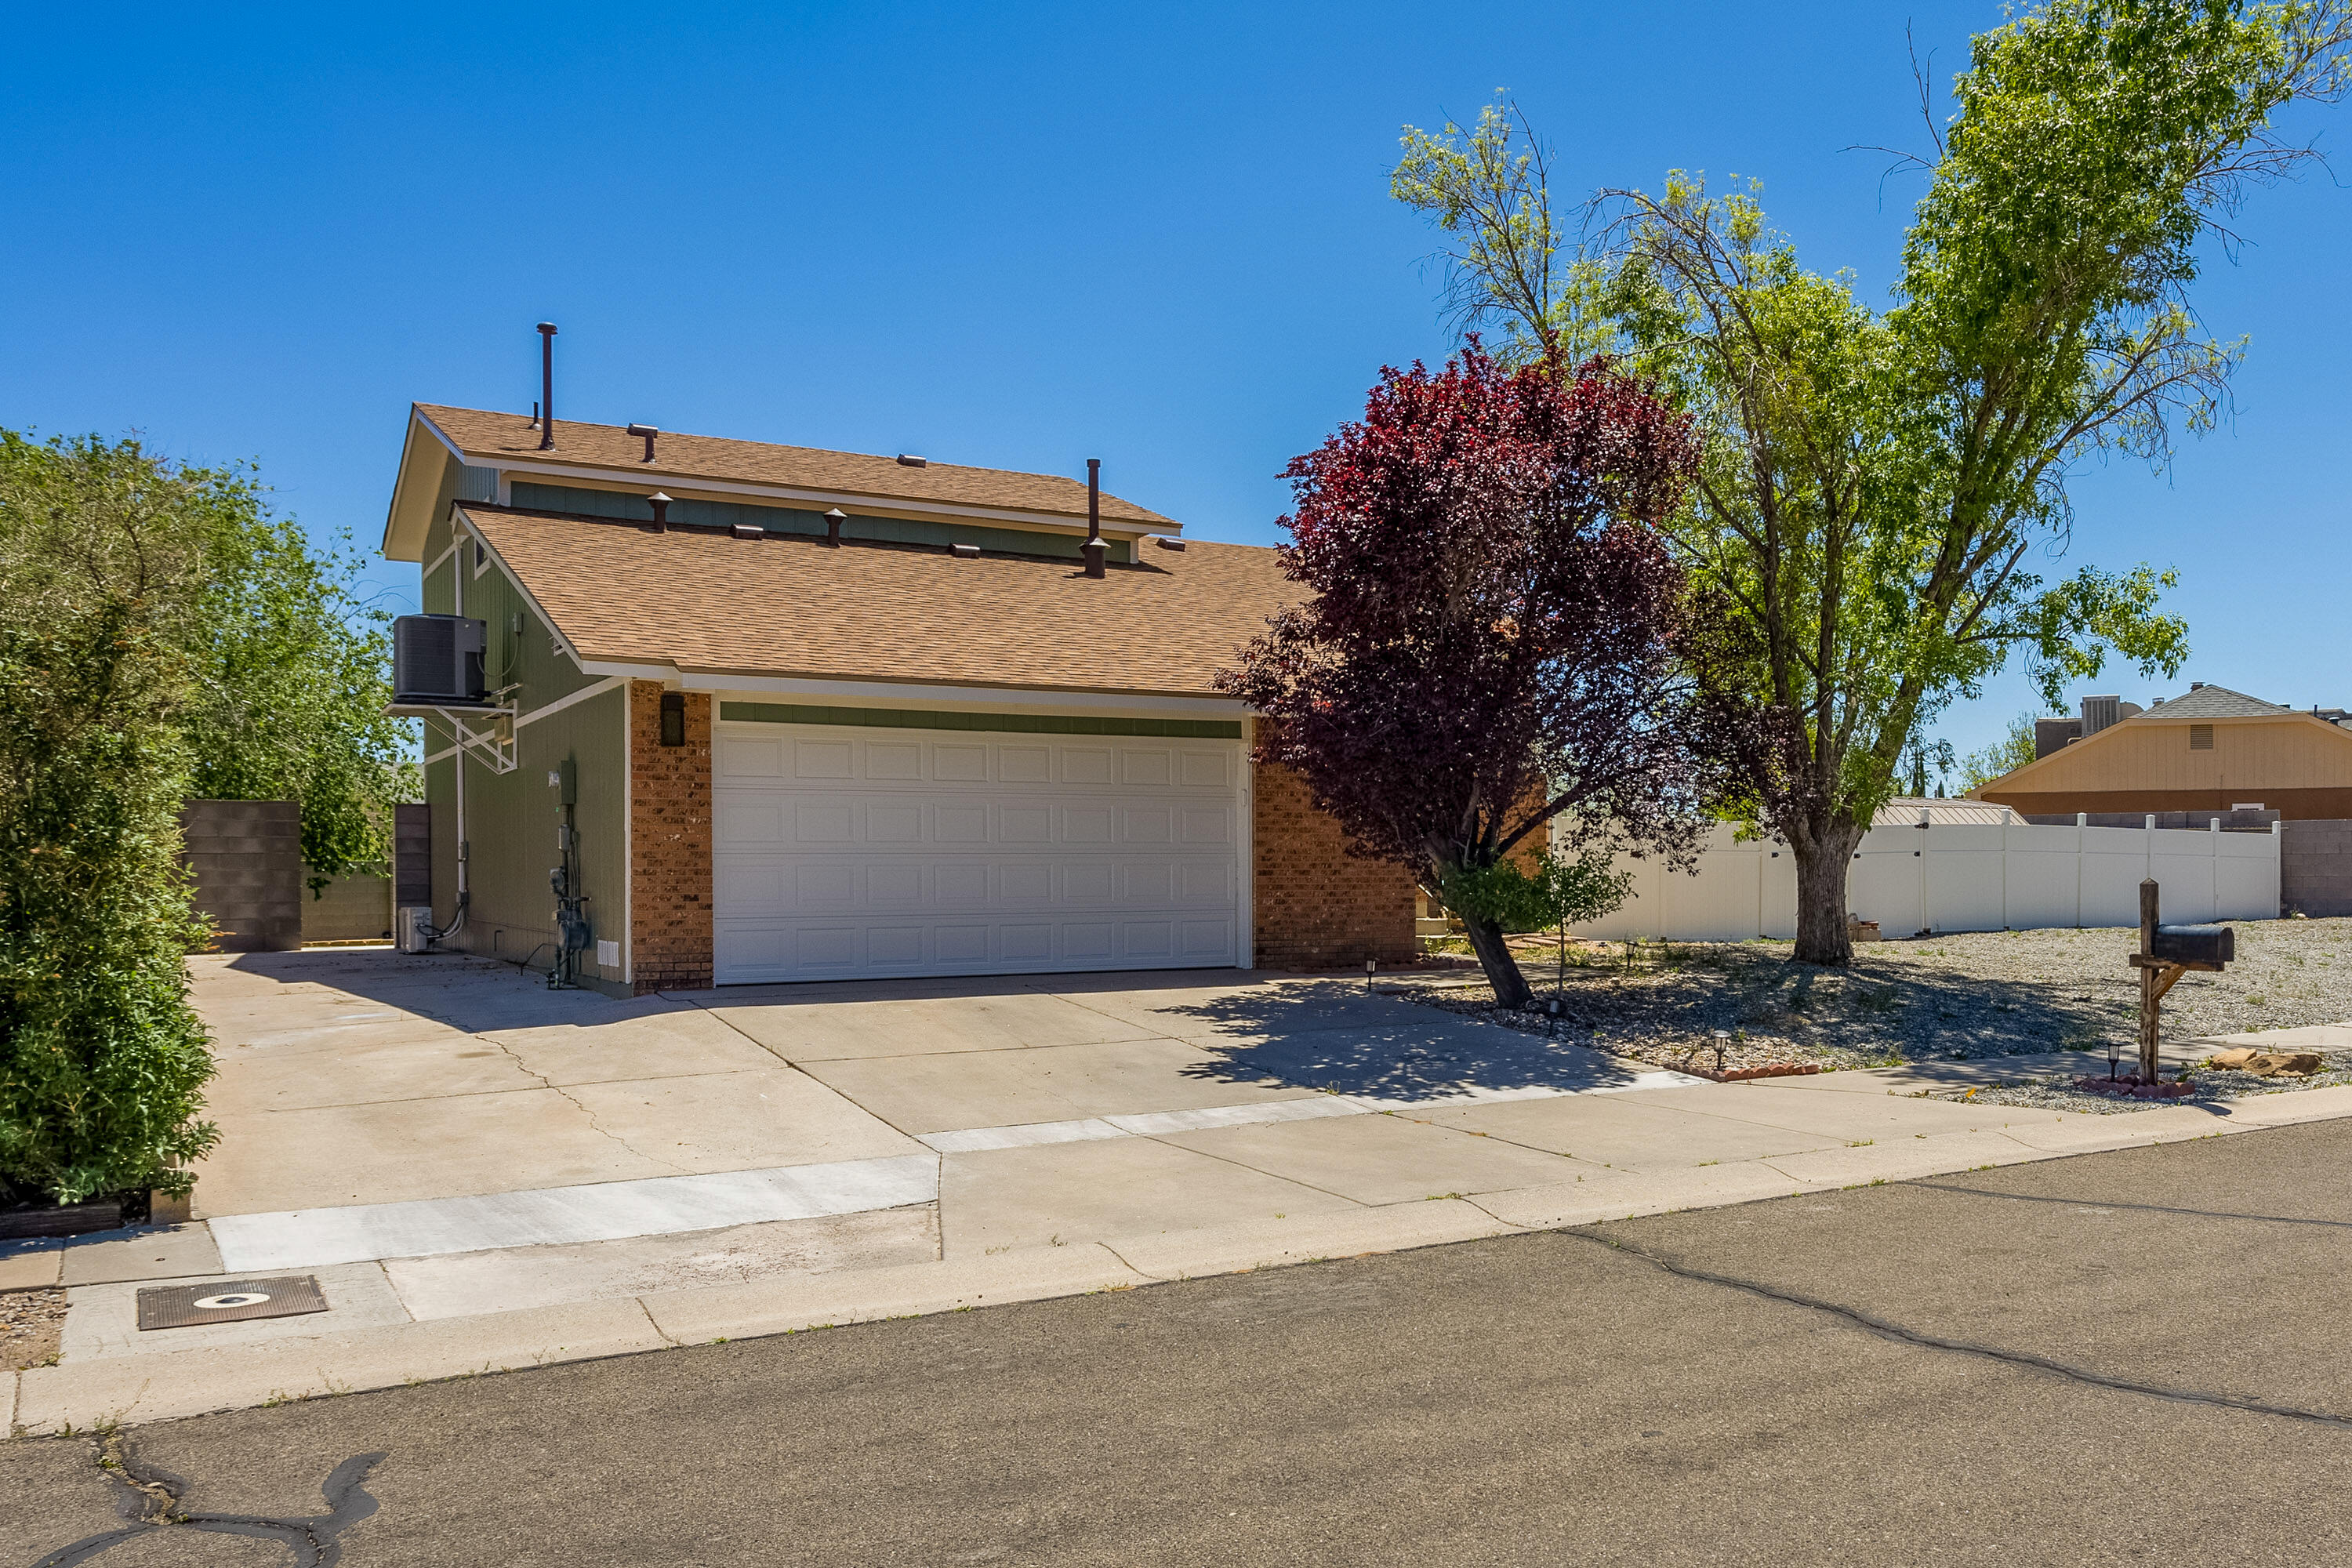 Welcome to this stunning Tri-Level home with vaulted ceilings in the Trinity Ranch neighborhood! Situated on a large lot with side yard access, this home offers both space and convenience. This home has been lovingly updated, with a newer tile roof (2023), along with a furnace and refrigerated air unit (2018) for year-round comfort. Additionally, the home features an isolated mini-split, ensuring efficient temperature control. Inside discover a beautifully renovated interior, featuring LVT flooring throughout. The upstairs primary bathroom was recently renovated (2024), boasting modern finishes. The expansive backyard is an oasis, complete with turf, a deck and perfect for outdoor entertaining. Don't miss your opportunity to own this gorgeous home in a desirable neighborhood.